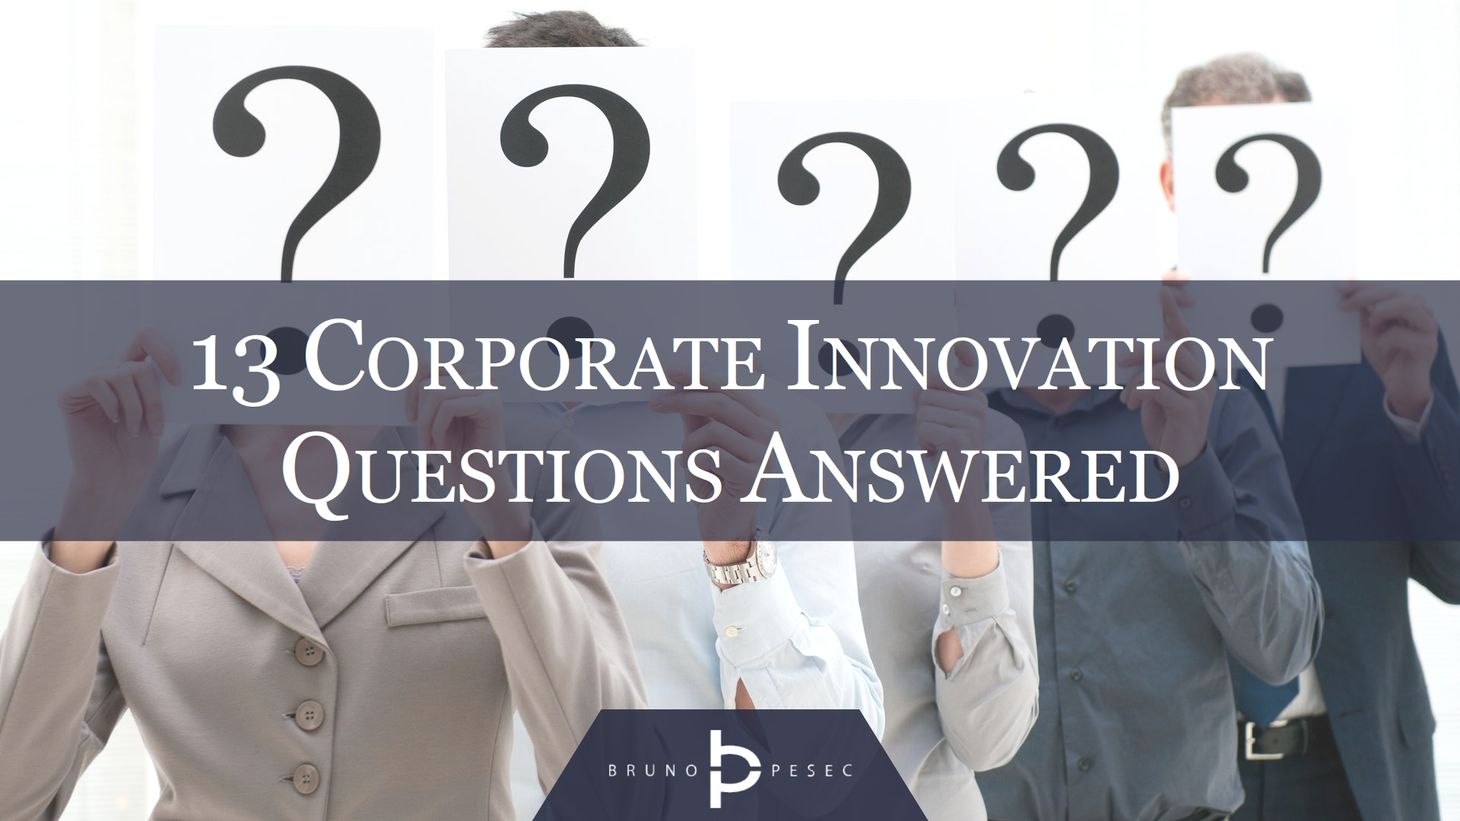 Thirteen corporate innovation questions answered